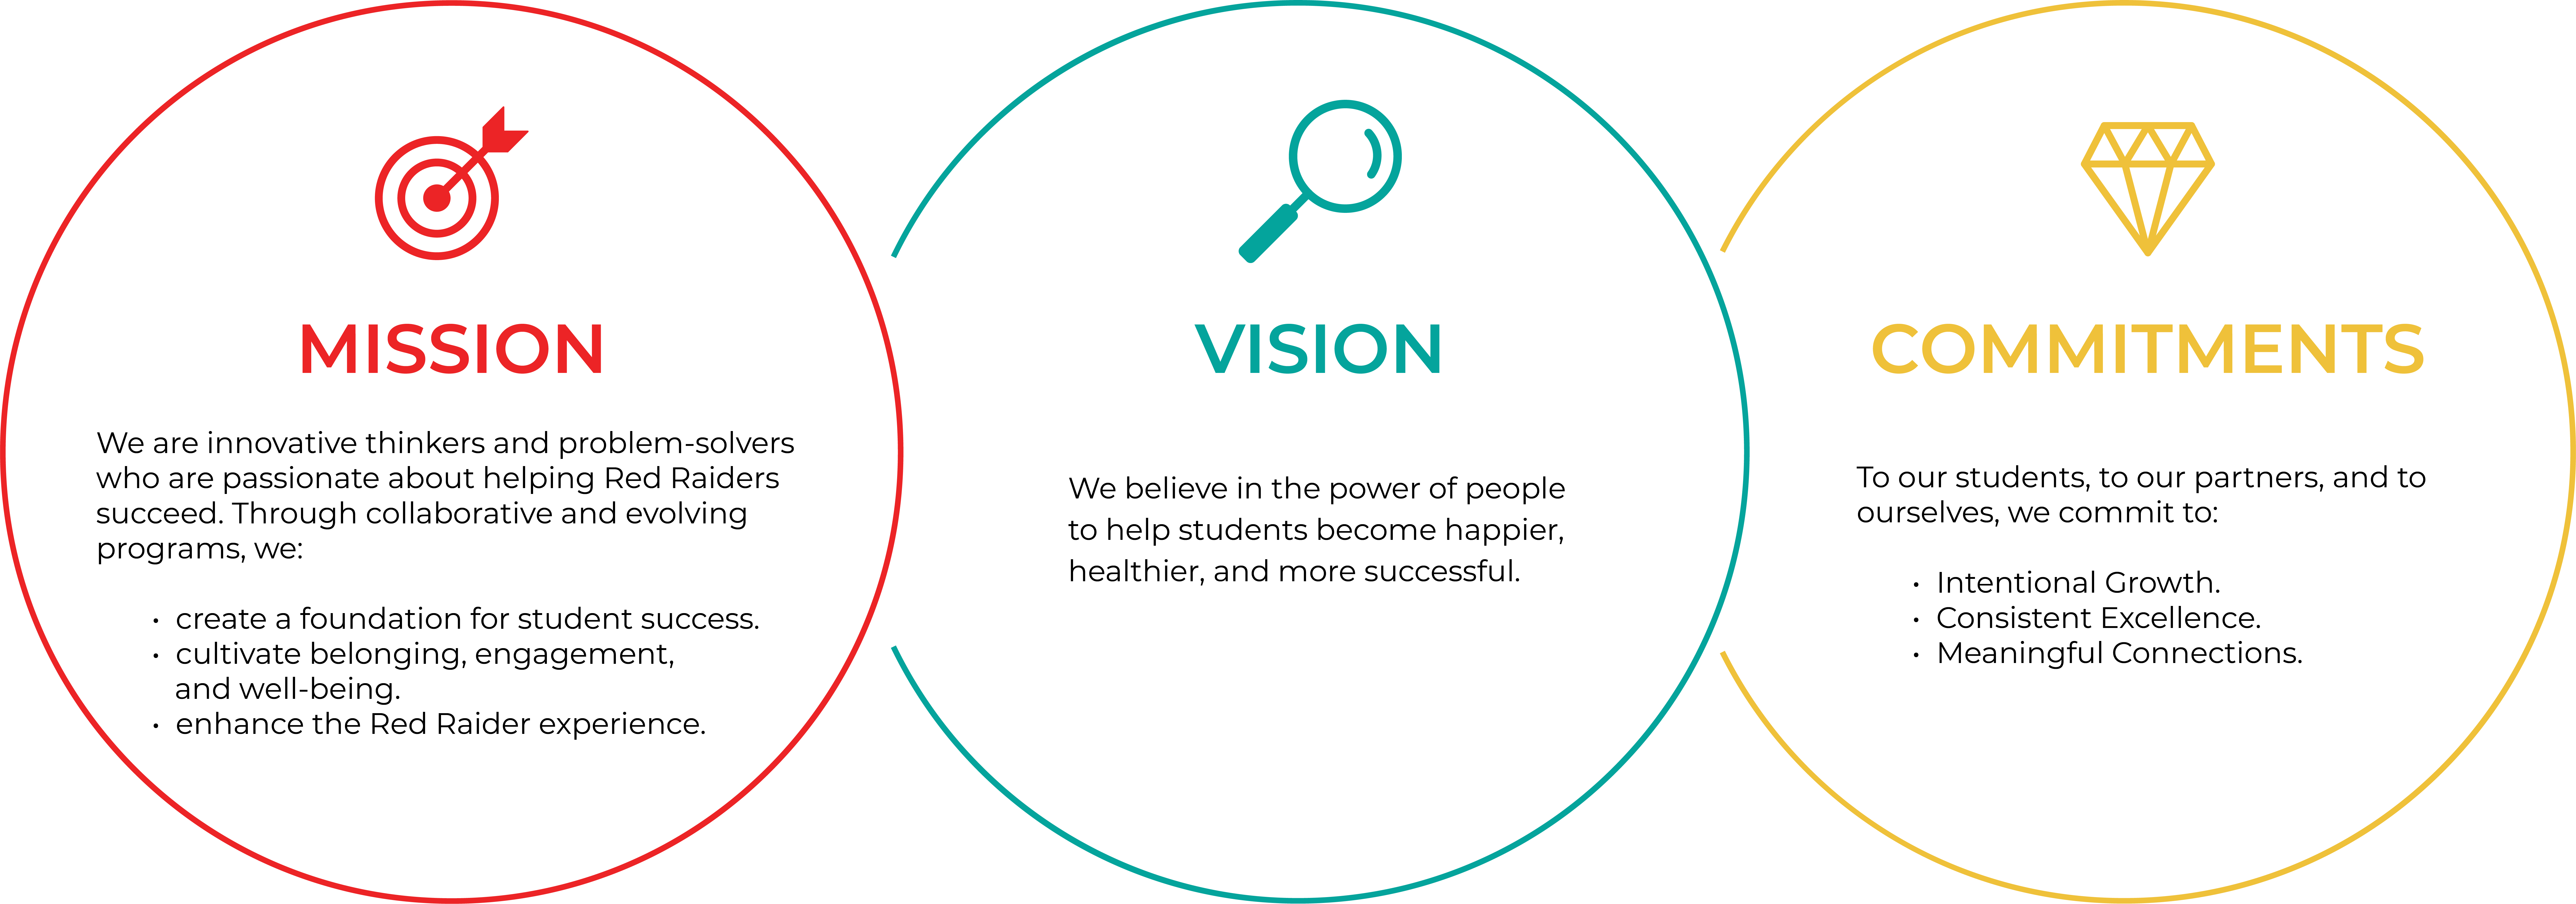 Three interlocking circles with the mission, vision and commitment text inside the circles.